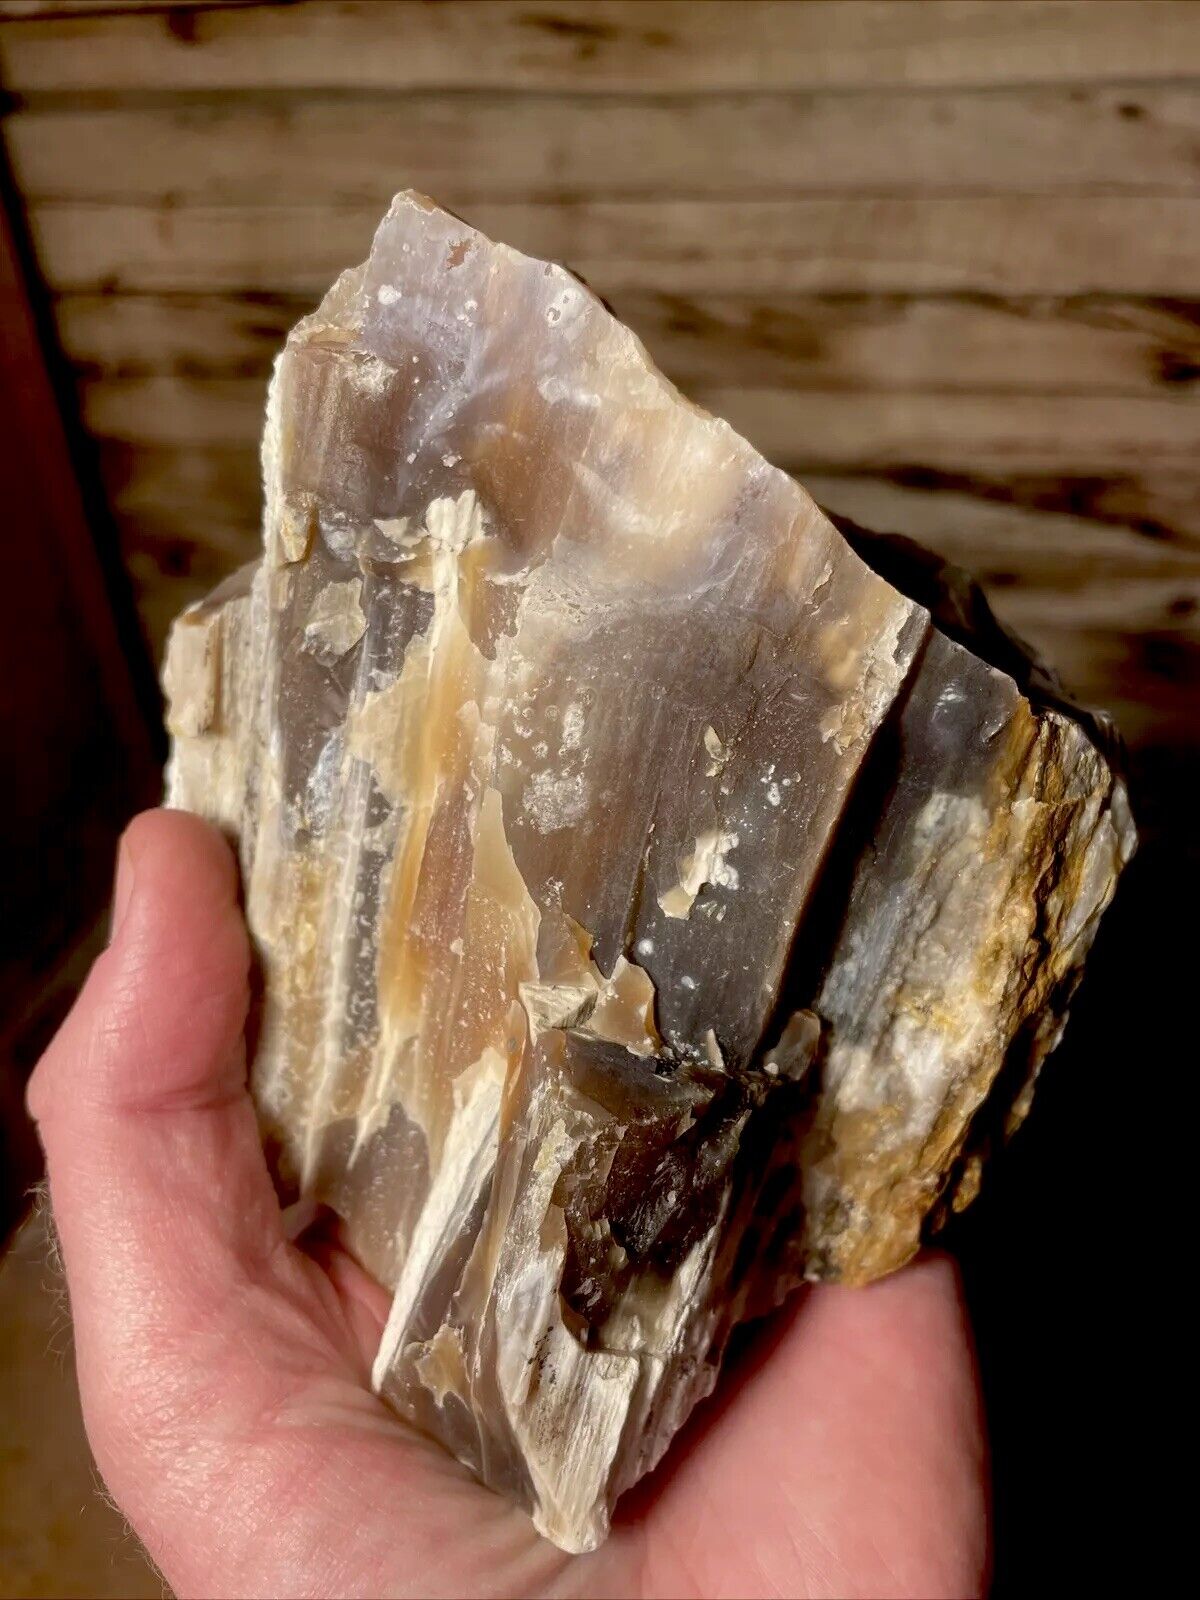 Large Opalized Petrified Wood Display - White, Gold, Brown 2.6 lb From Utah